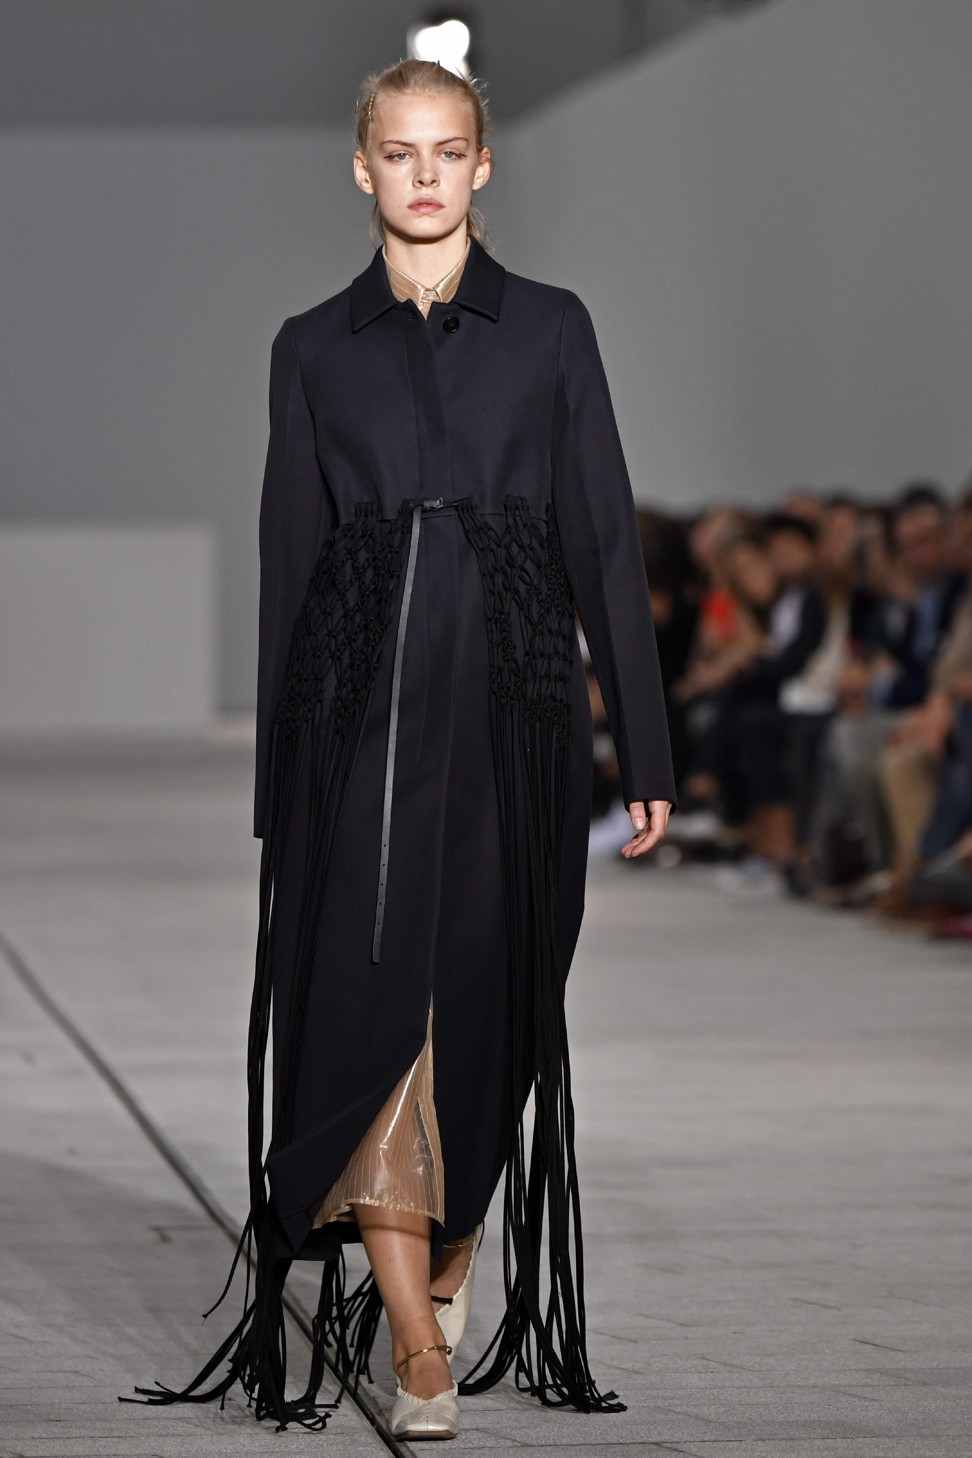 Jil Sander’s latest collection felt closest to the spirit of the original designer with pared back looks. Photo: AFP